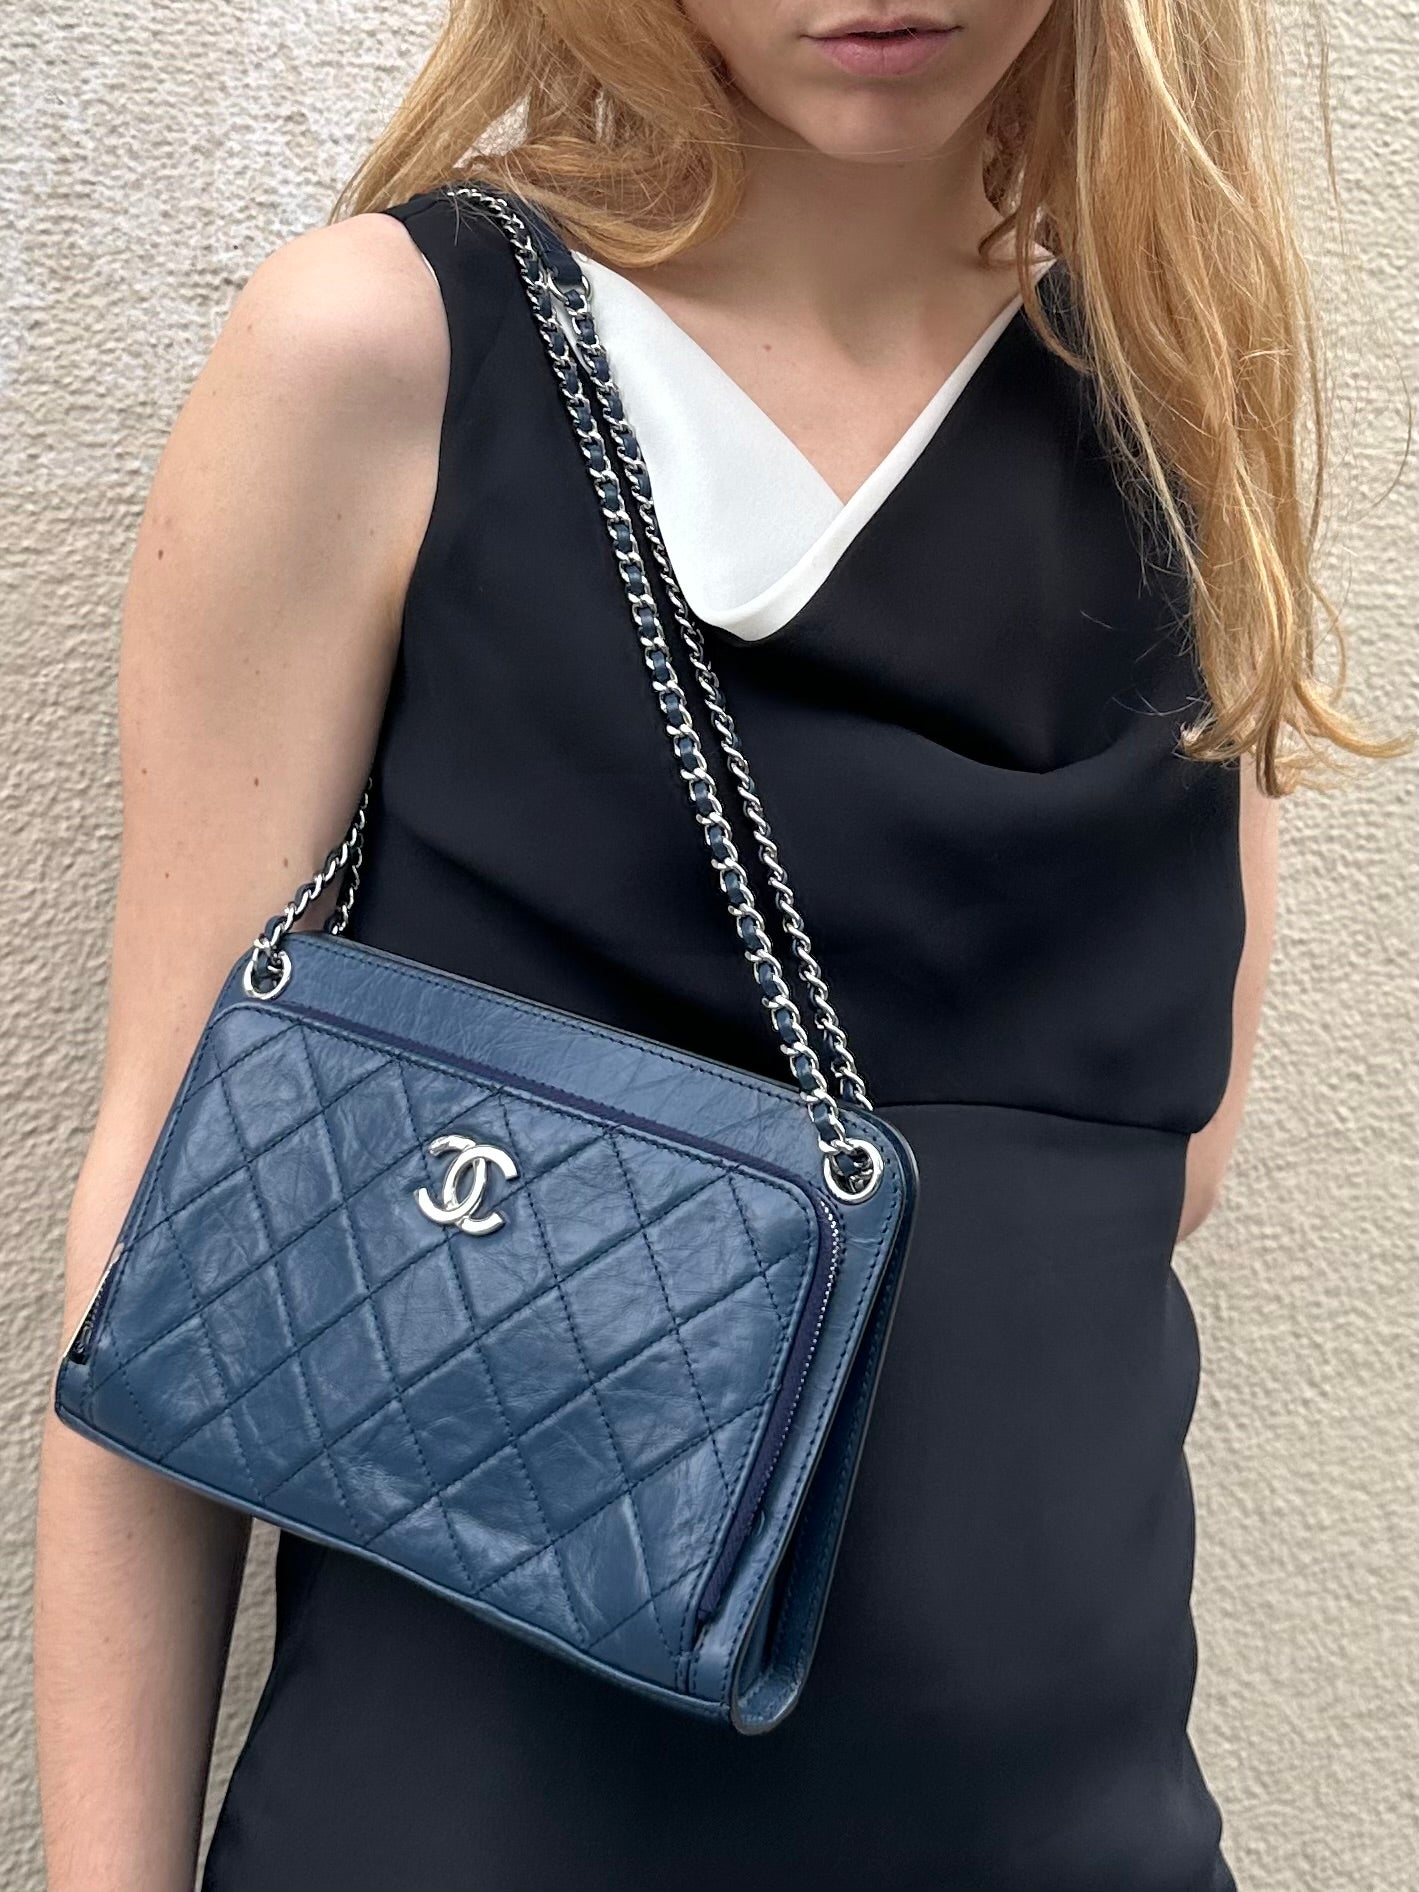 CHANEL LEATHER PURSE